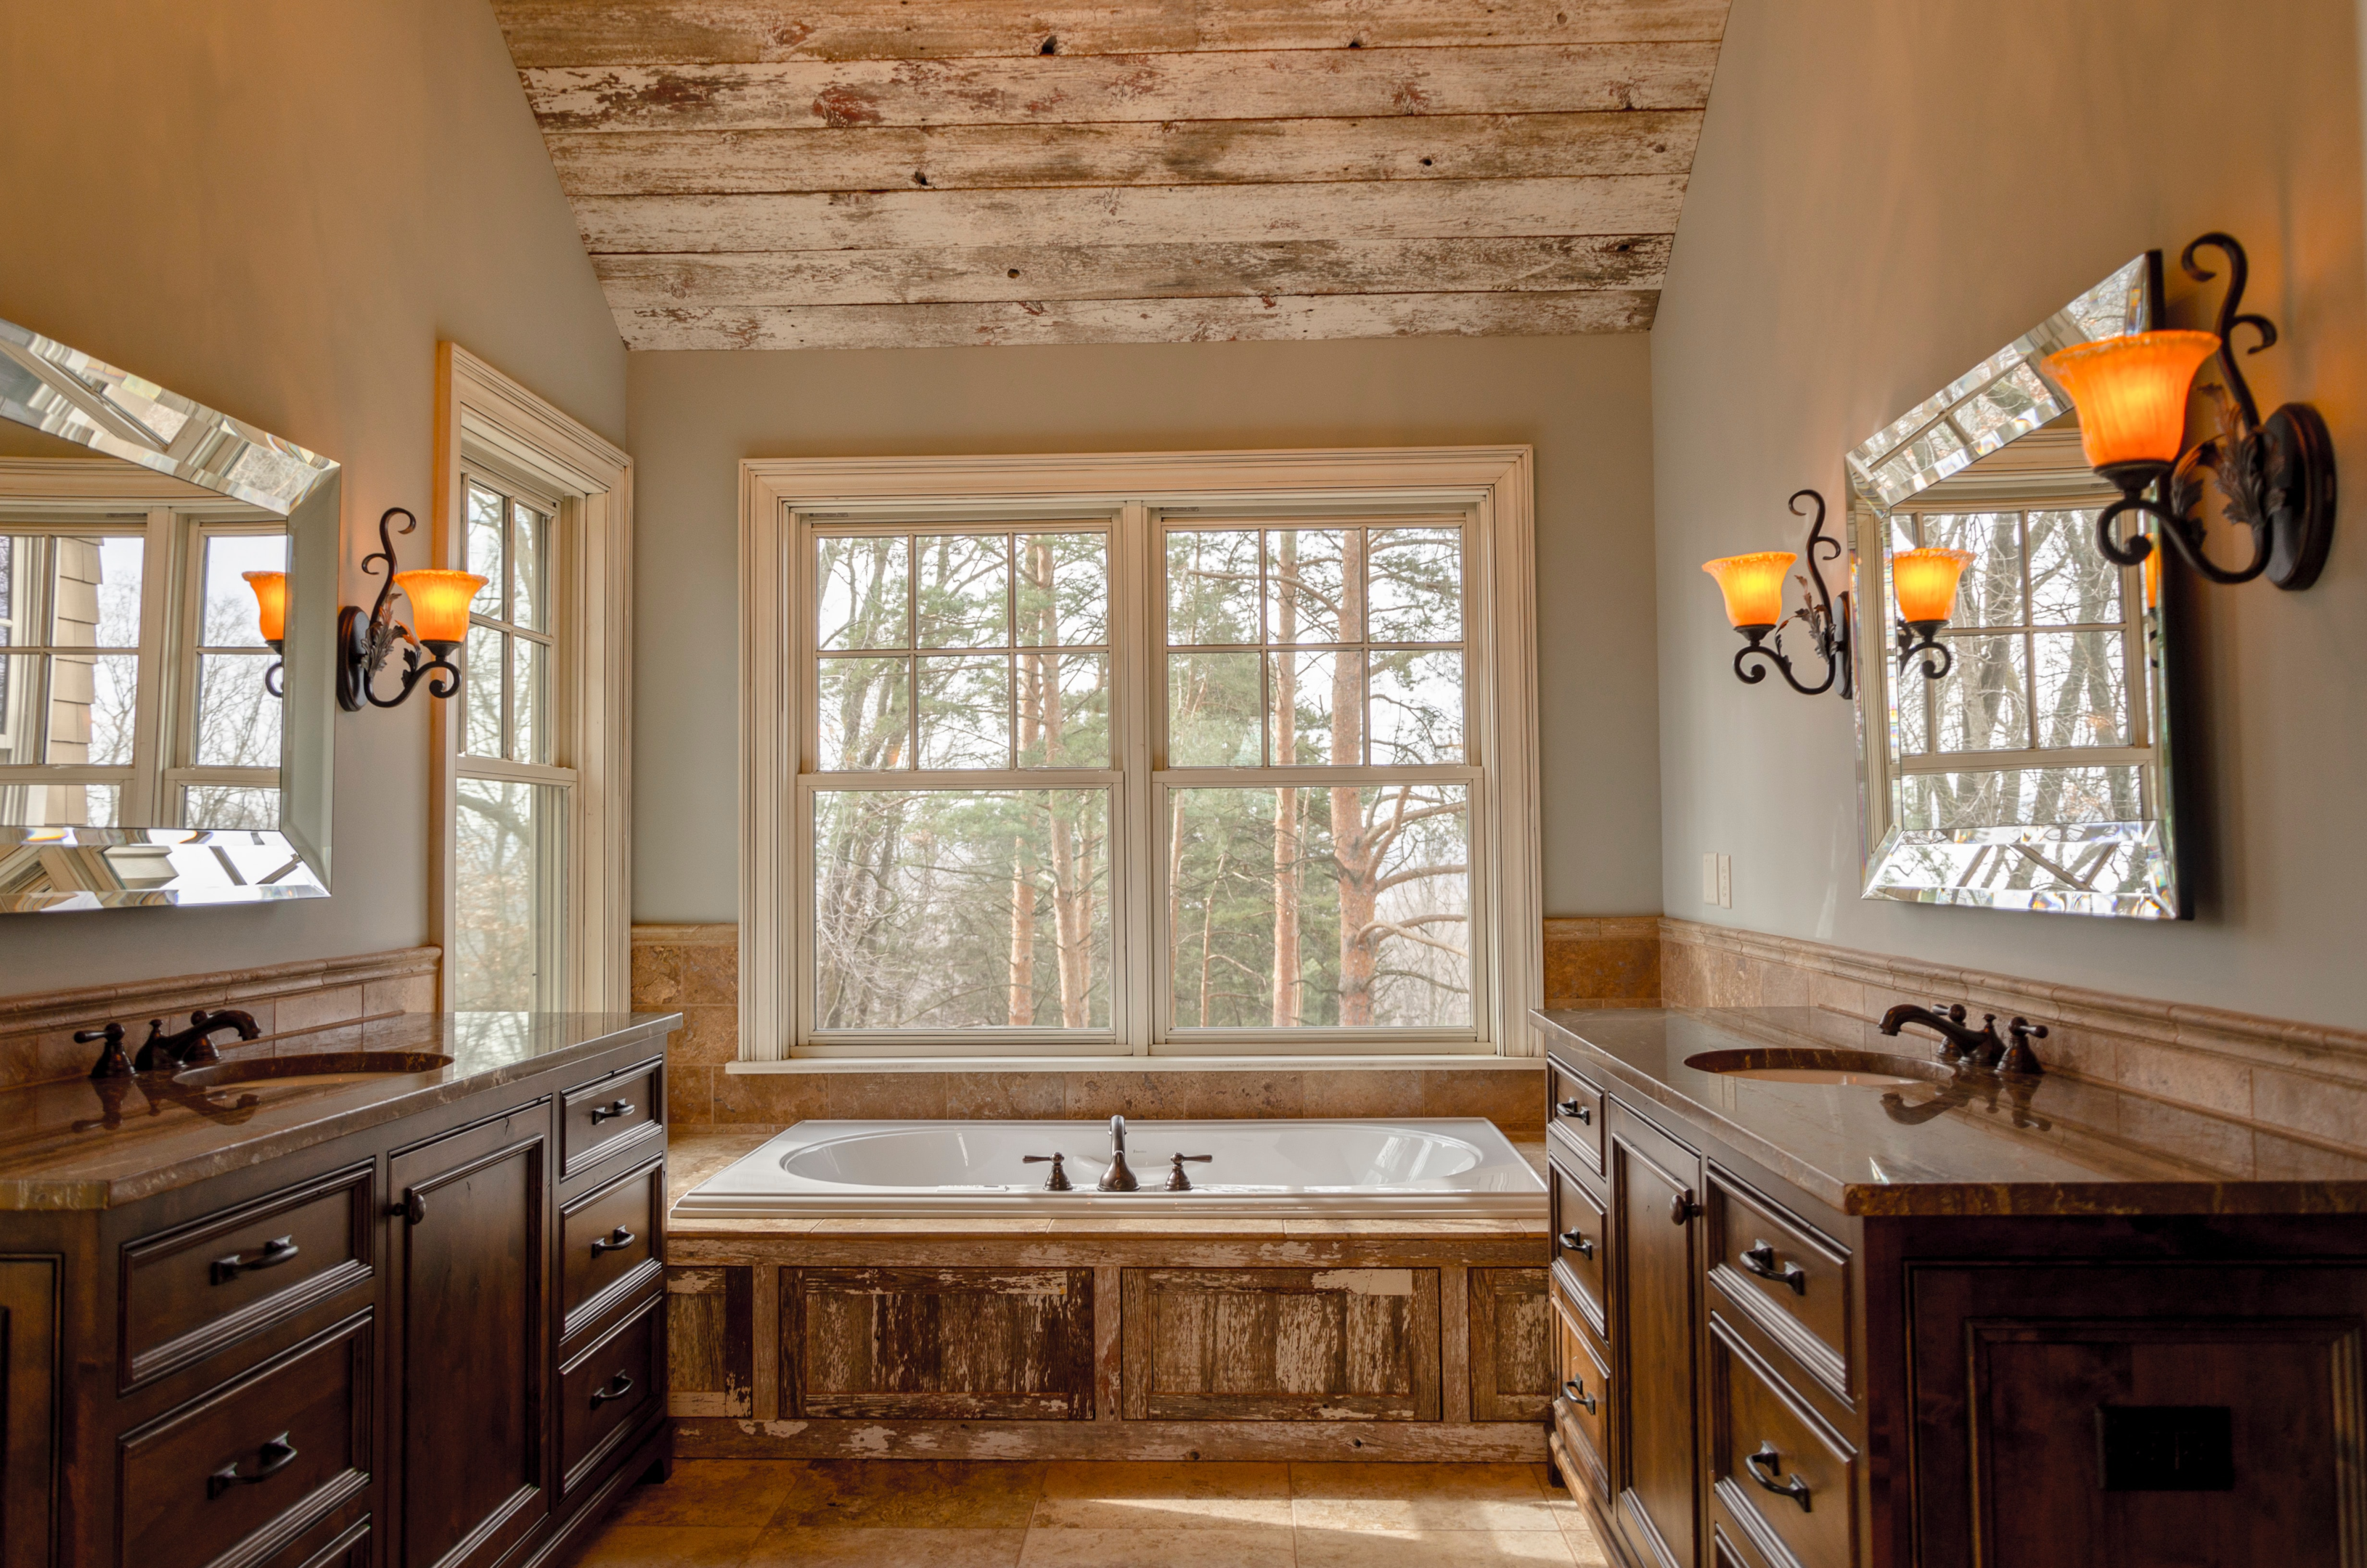 A beautiful rustic bathroom with an abundance of exposed wood and ornate lighting fixtures